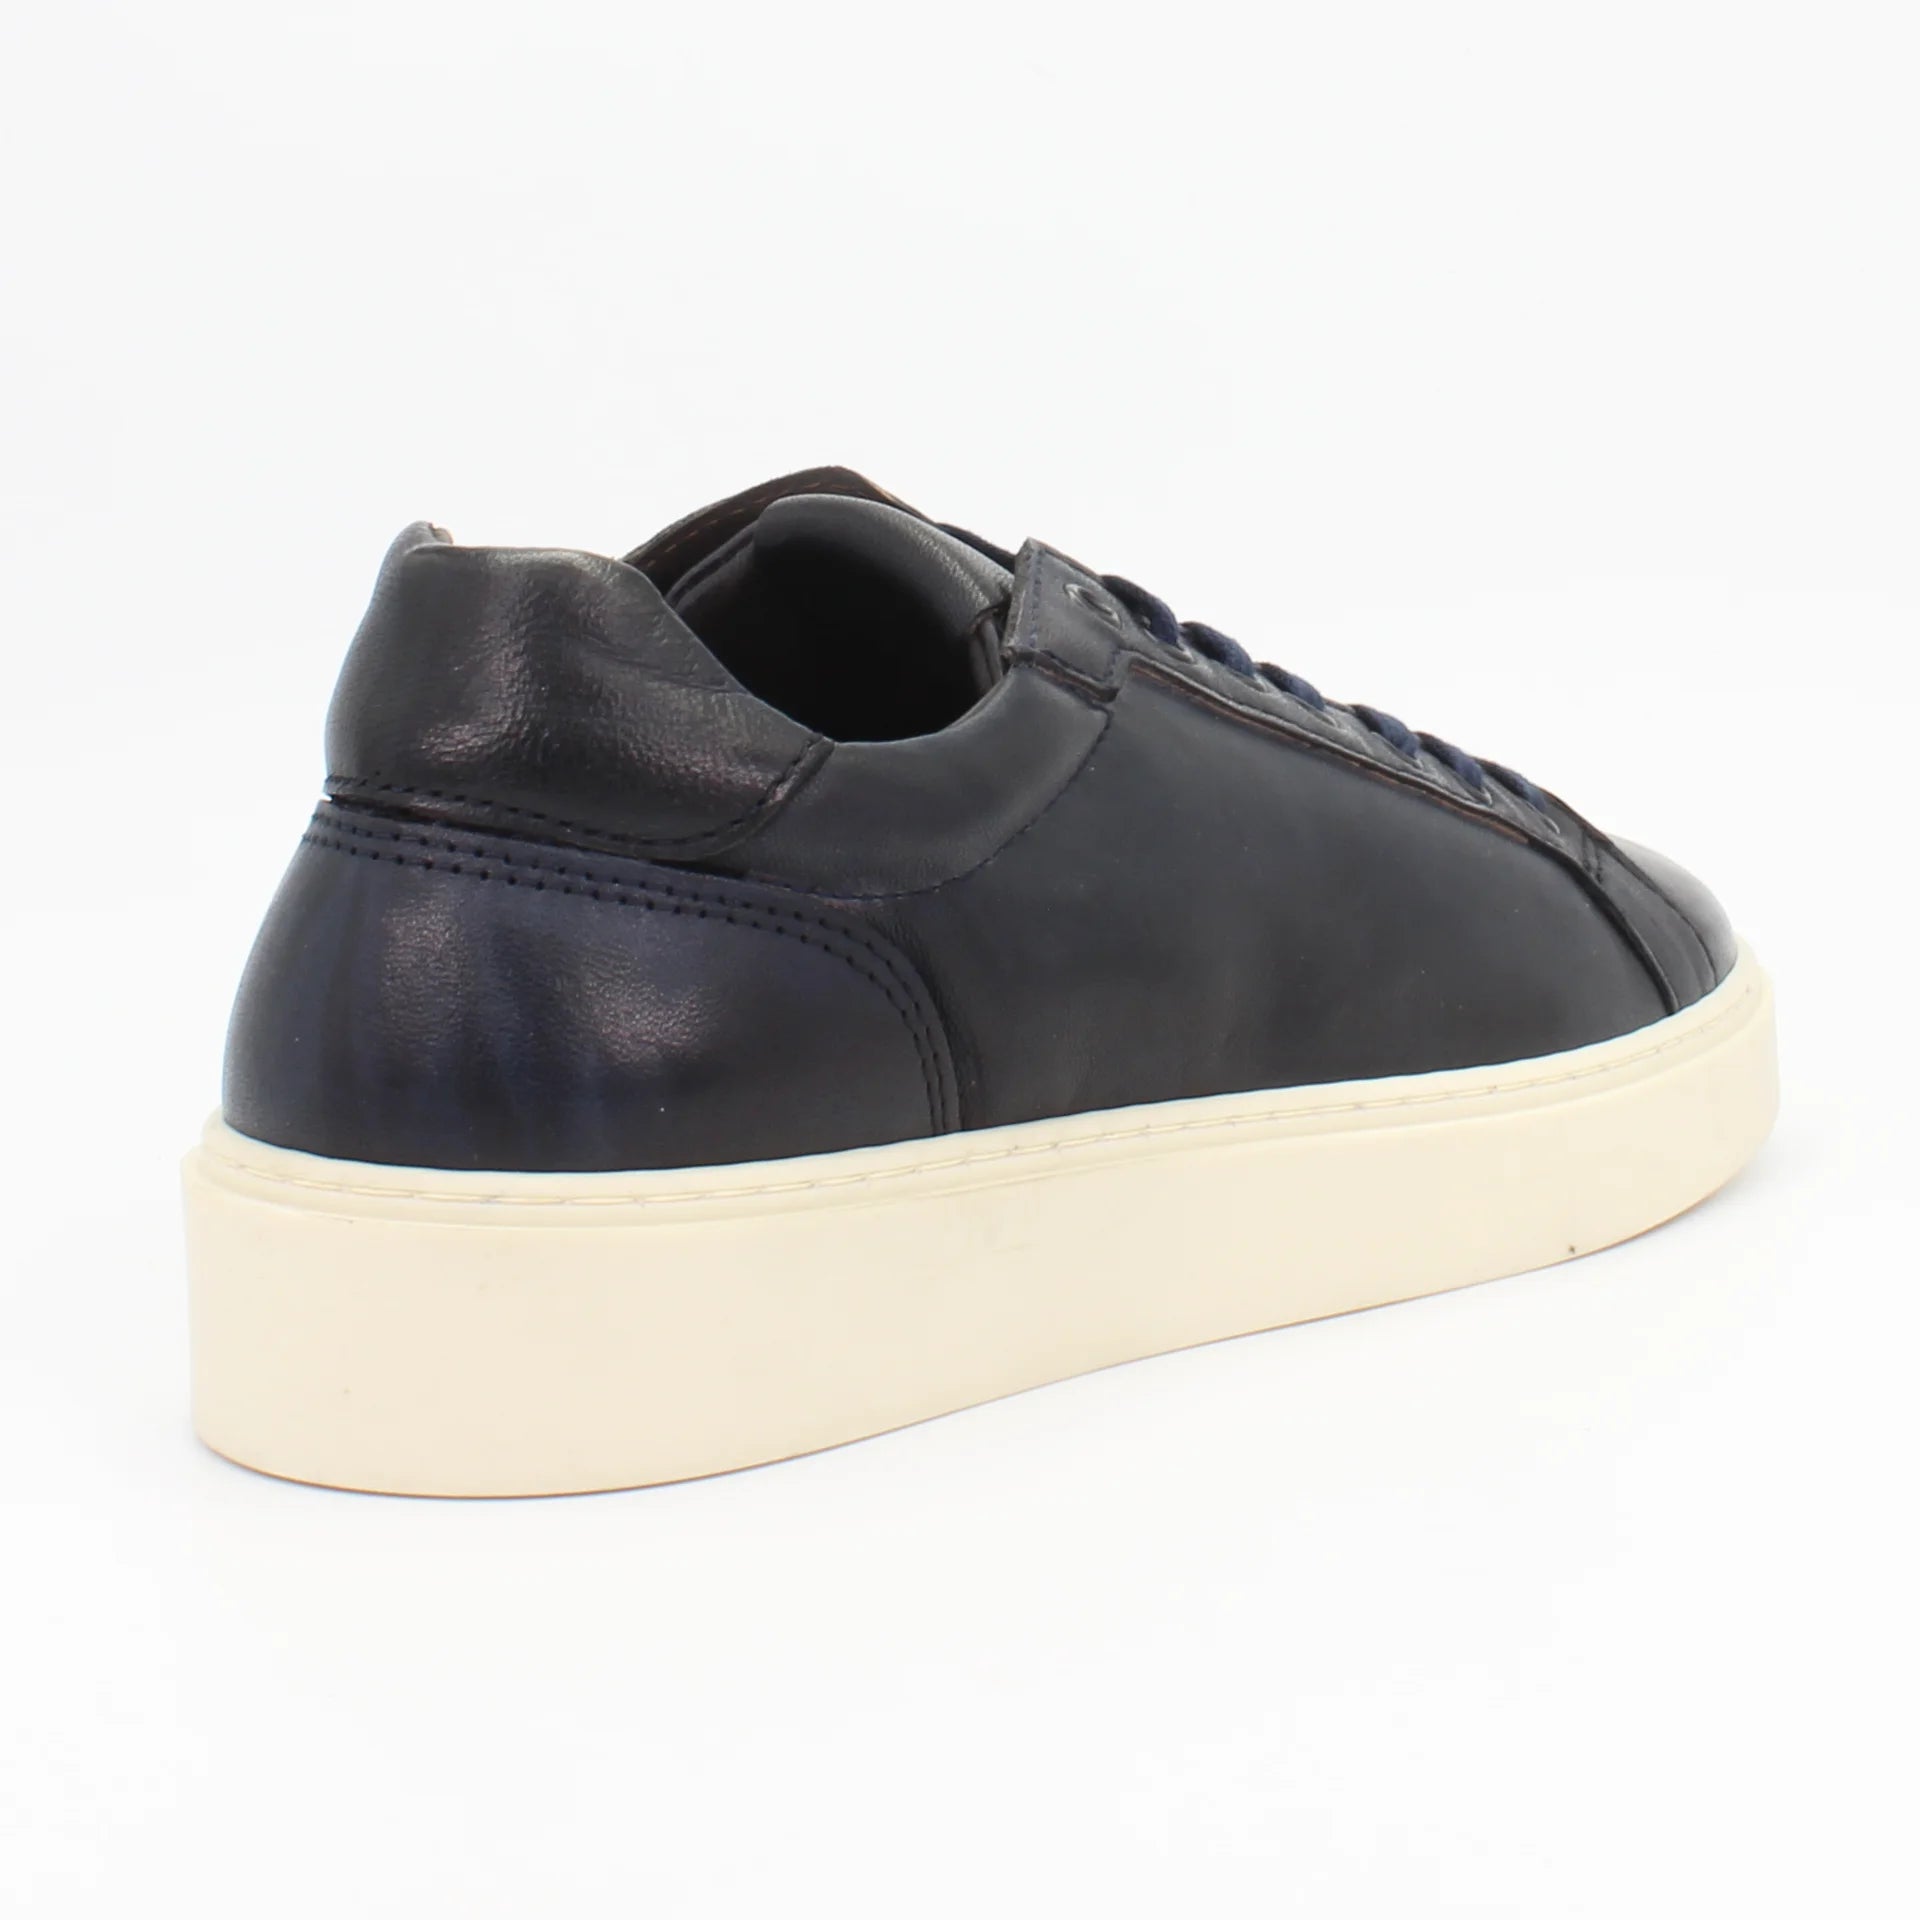 Shop Handmade Italian Leather Sneakers in Blu (COR1068) or browse our range of hand-made Italian shoes for men in leather or suede in-store at Aliverti Cape Town, or shop online. We deliver in South Africa & offer multiple payment plans as well as accept multiple safe & secure payment methods.